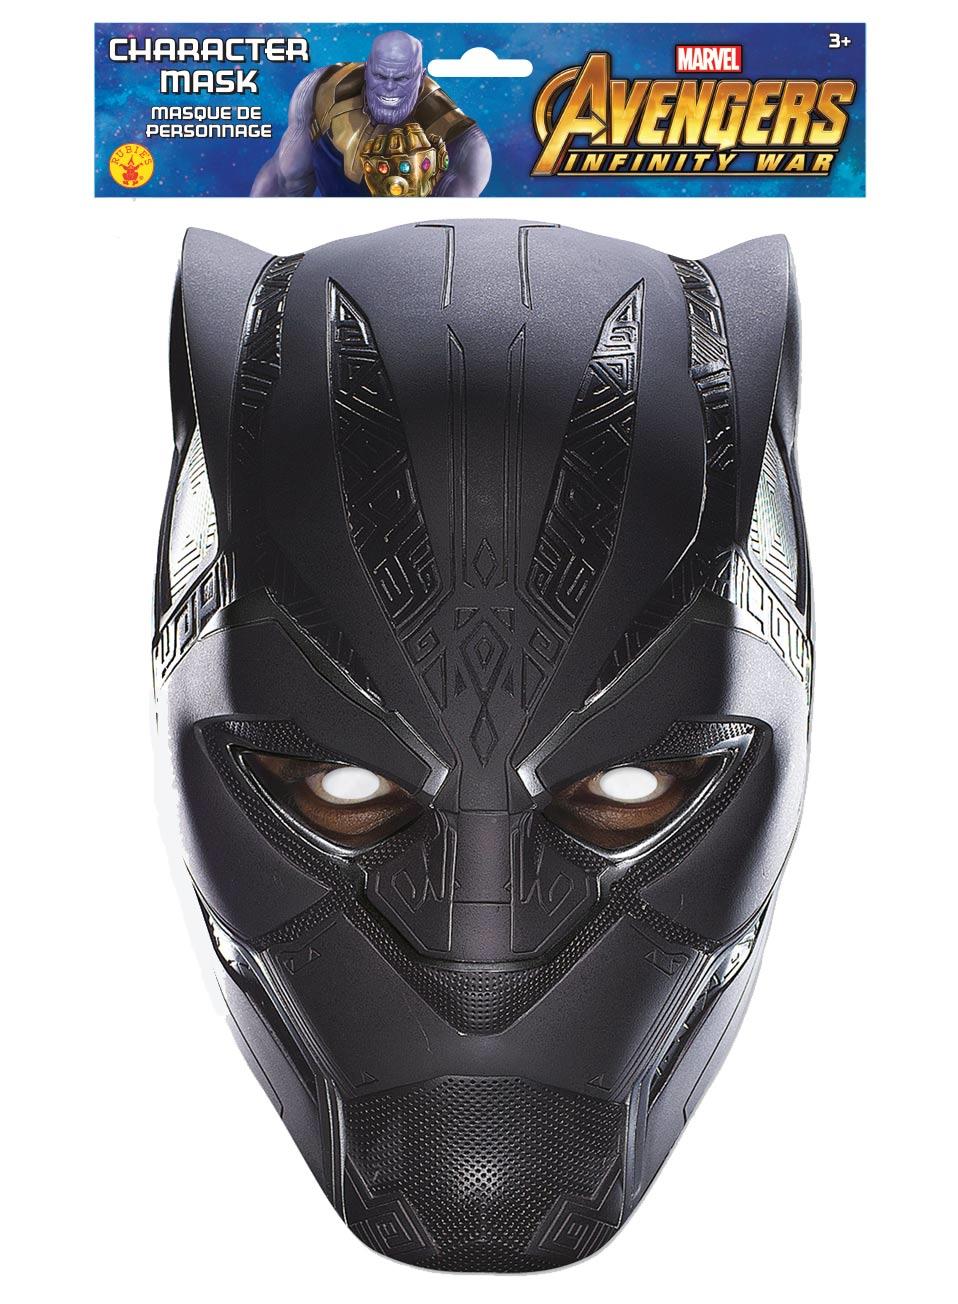 Black Panther Character Face Mask  by Mask-erade 200329 available from the Avengers Infinity War collection here at Karnival Costumes online party shop